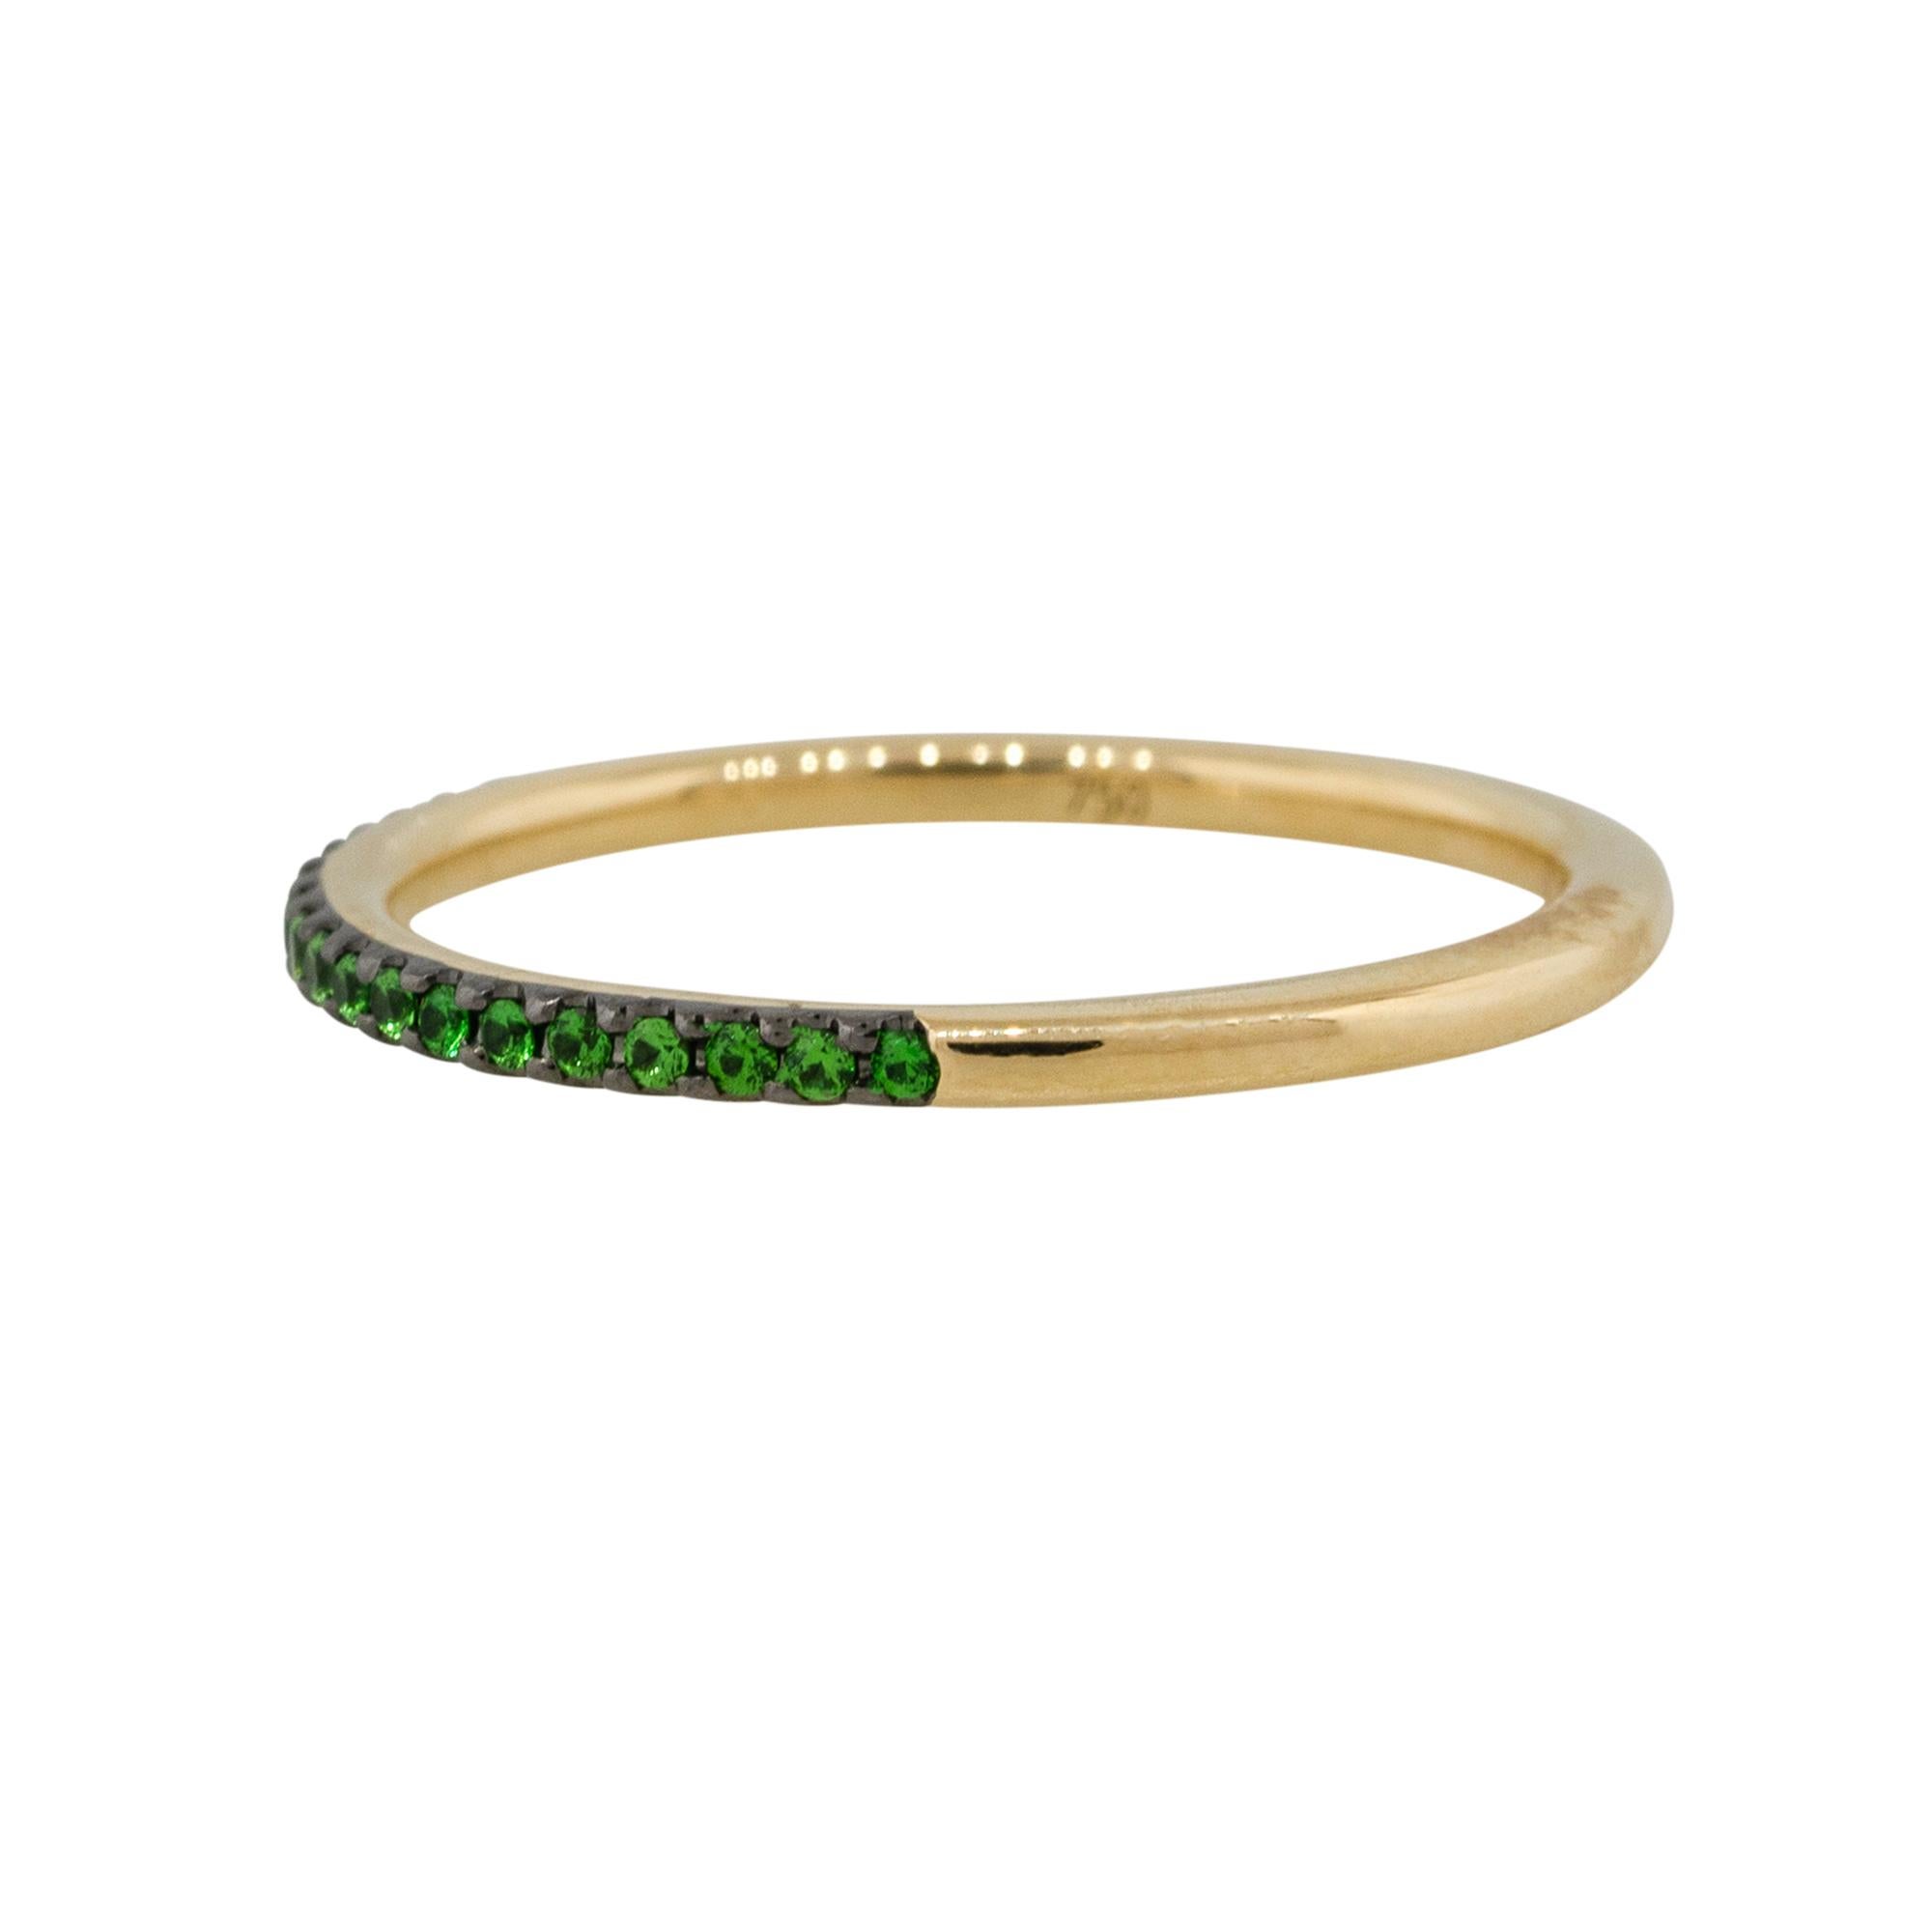 Material: 18k Yellow Gold
Gemstone details: Approximately 0.12ctw of round cut emeralds
Ring Size: 6.5 
Total Weight: 2.0g (1.3dwt) 
Measurements: 0.75